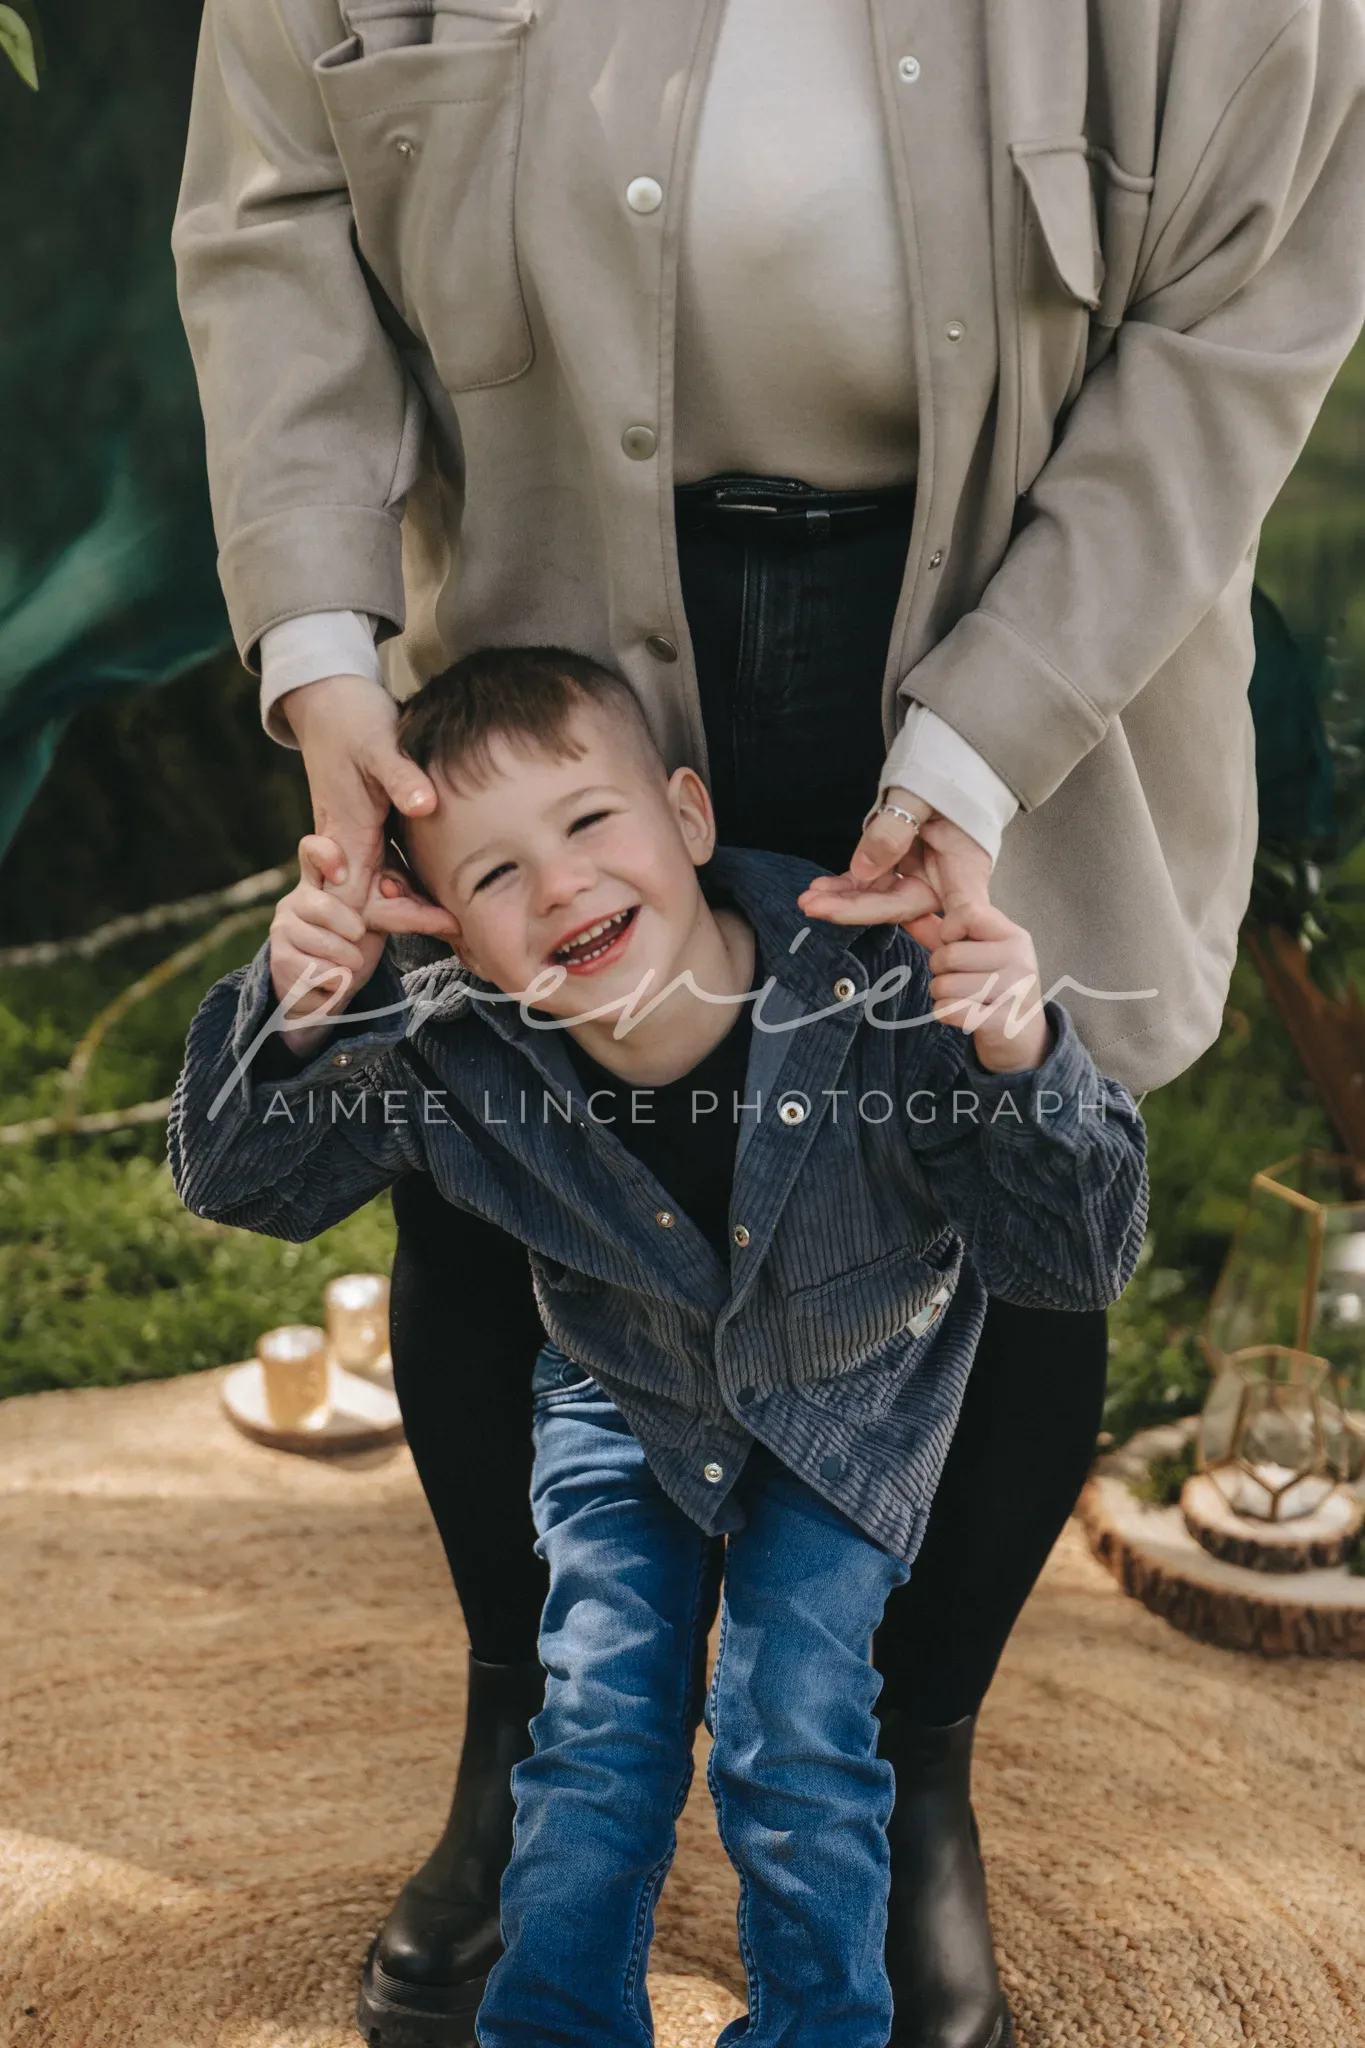 A joyful toddler boy, Gabrielle, smiles brightly, held playfully by his mother's hands around his ears. He wears a denim jacket and jeans. The backdrop features lush greenery, soft lighting